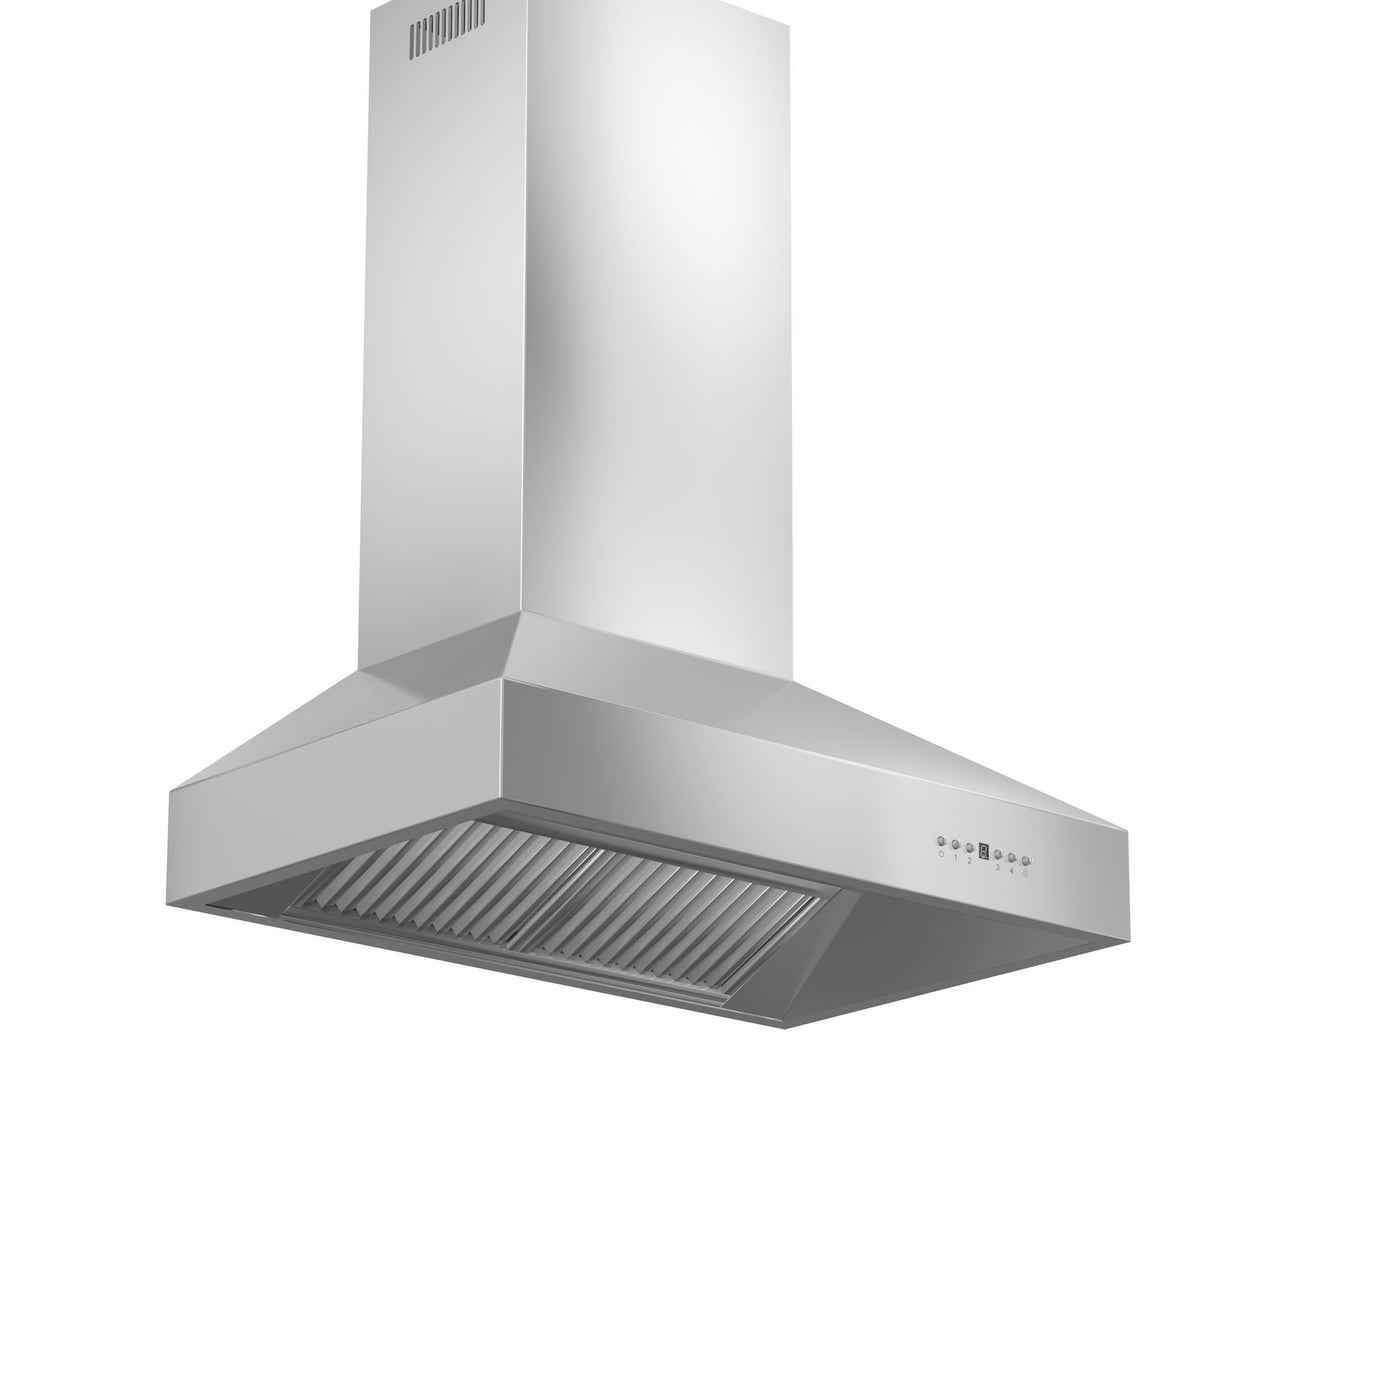 ZLINE Kitchen and Bath, ZLINE Professional Wall Mount Range Hood in Stainless Steel with Crown Molding (667CRN), 667CRN-30,